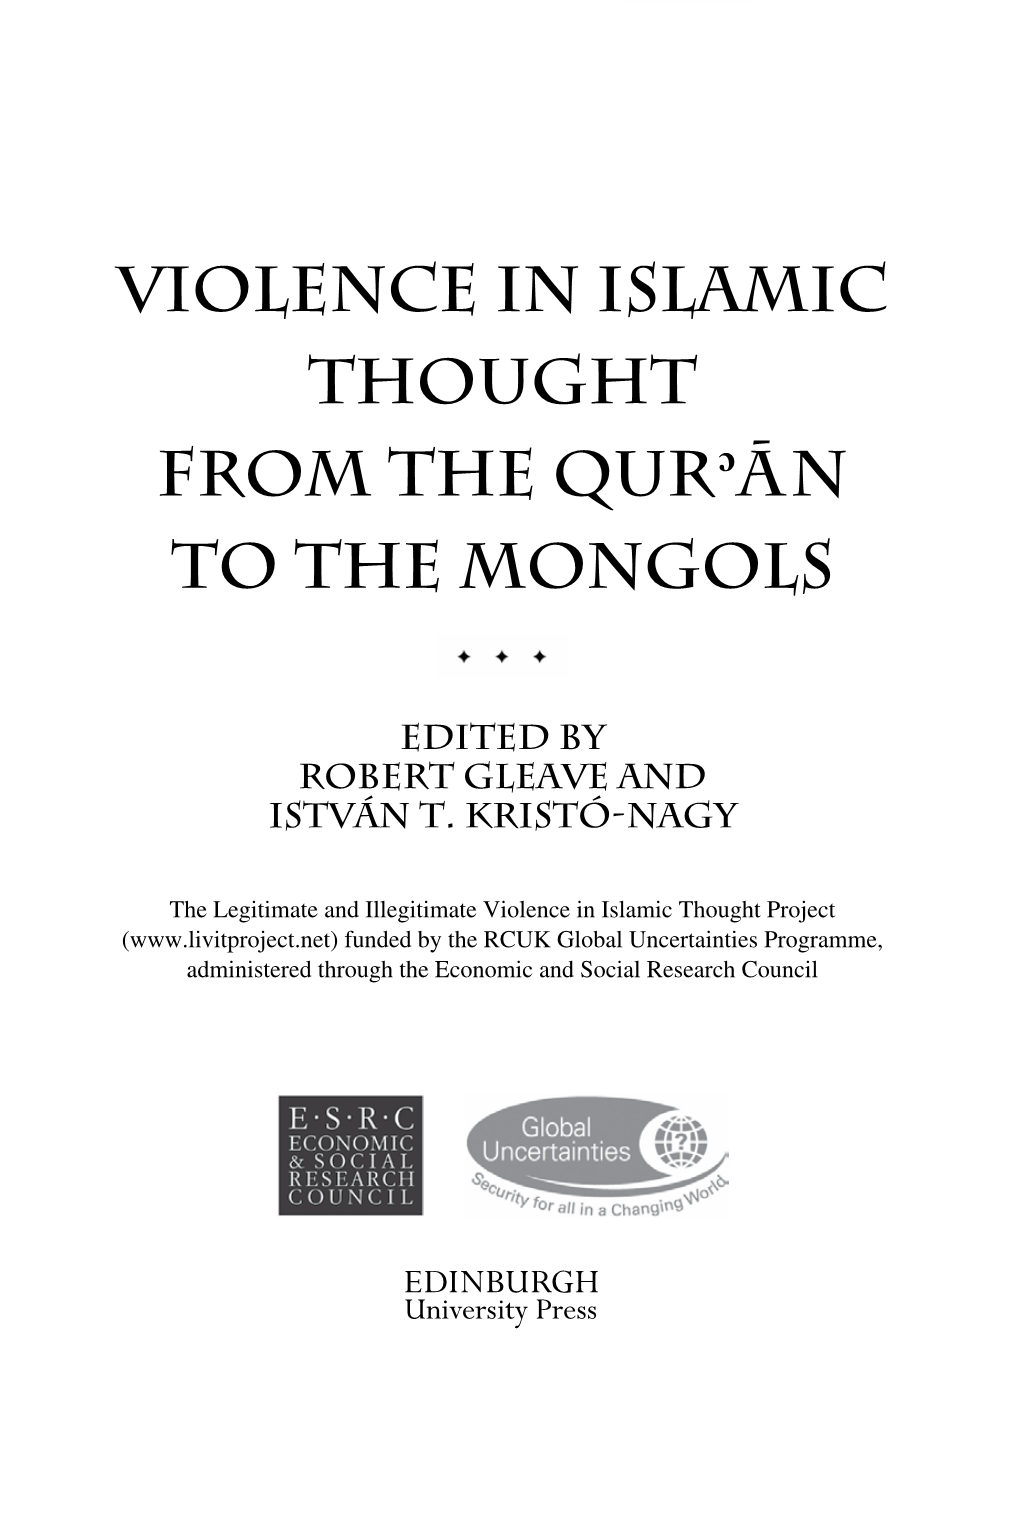 Violence in Islamic Thought from the Qurʾa¯N to the Mongols